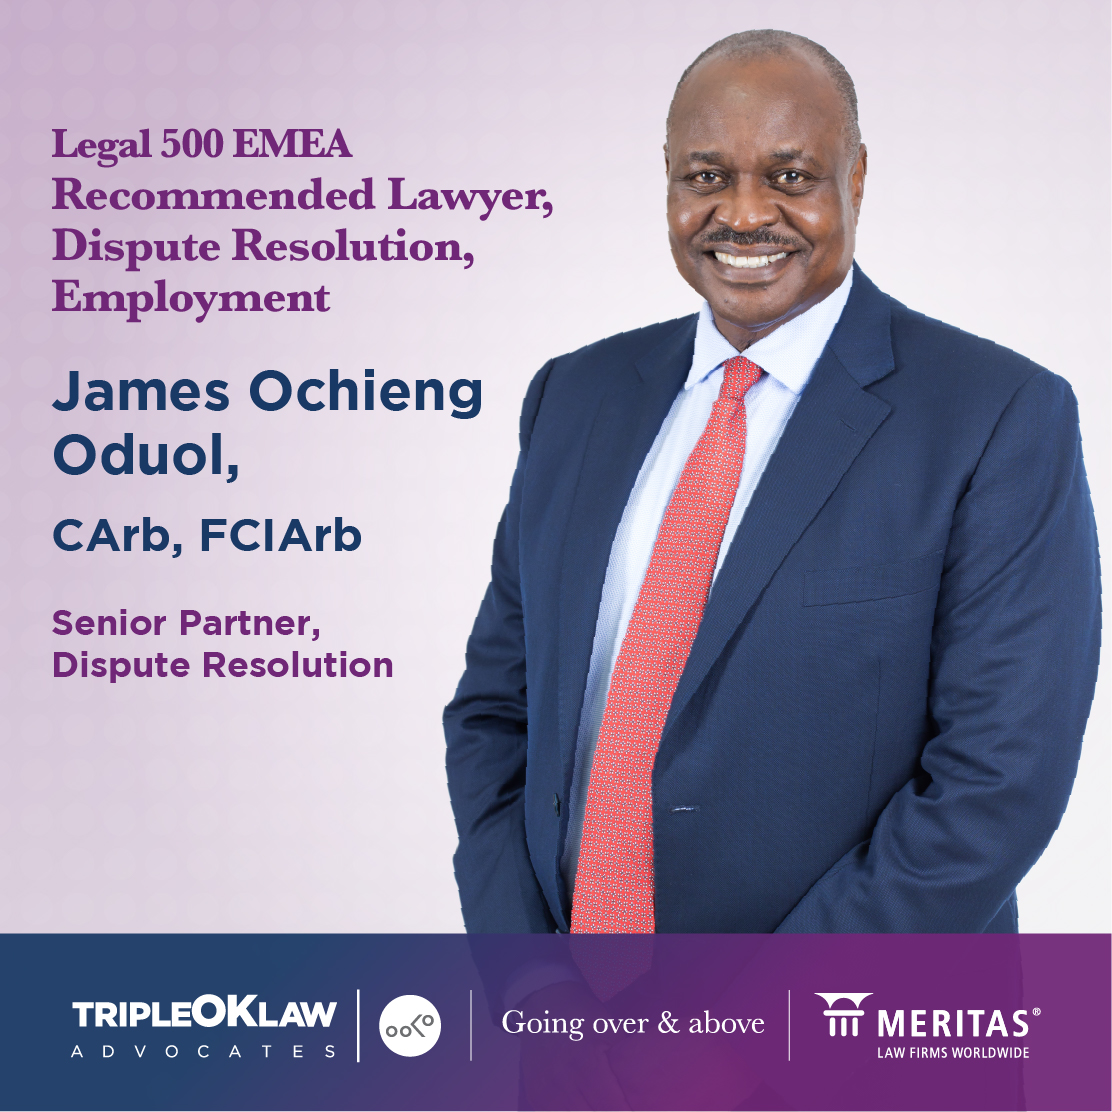 We are very pleased to announce that our lawyers have been ranked as some of Kenya’s finest in The Legal 500 EMEA 2023 rankings.

#TripleOKLawLLP #toplawyers #legal500 #corporatelaw #disputeresolution #bankingandfinance